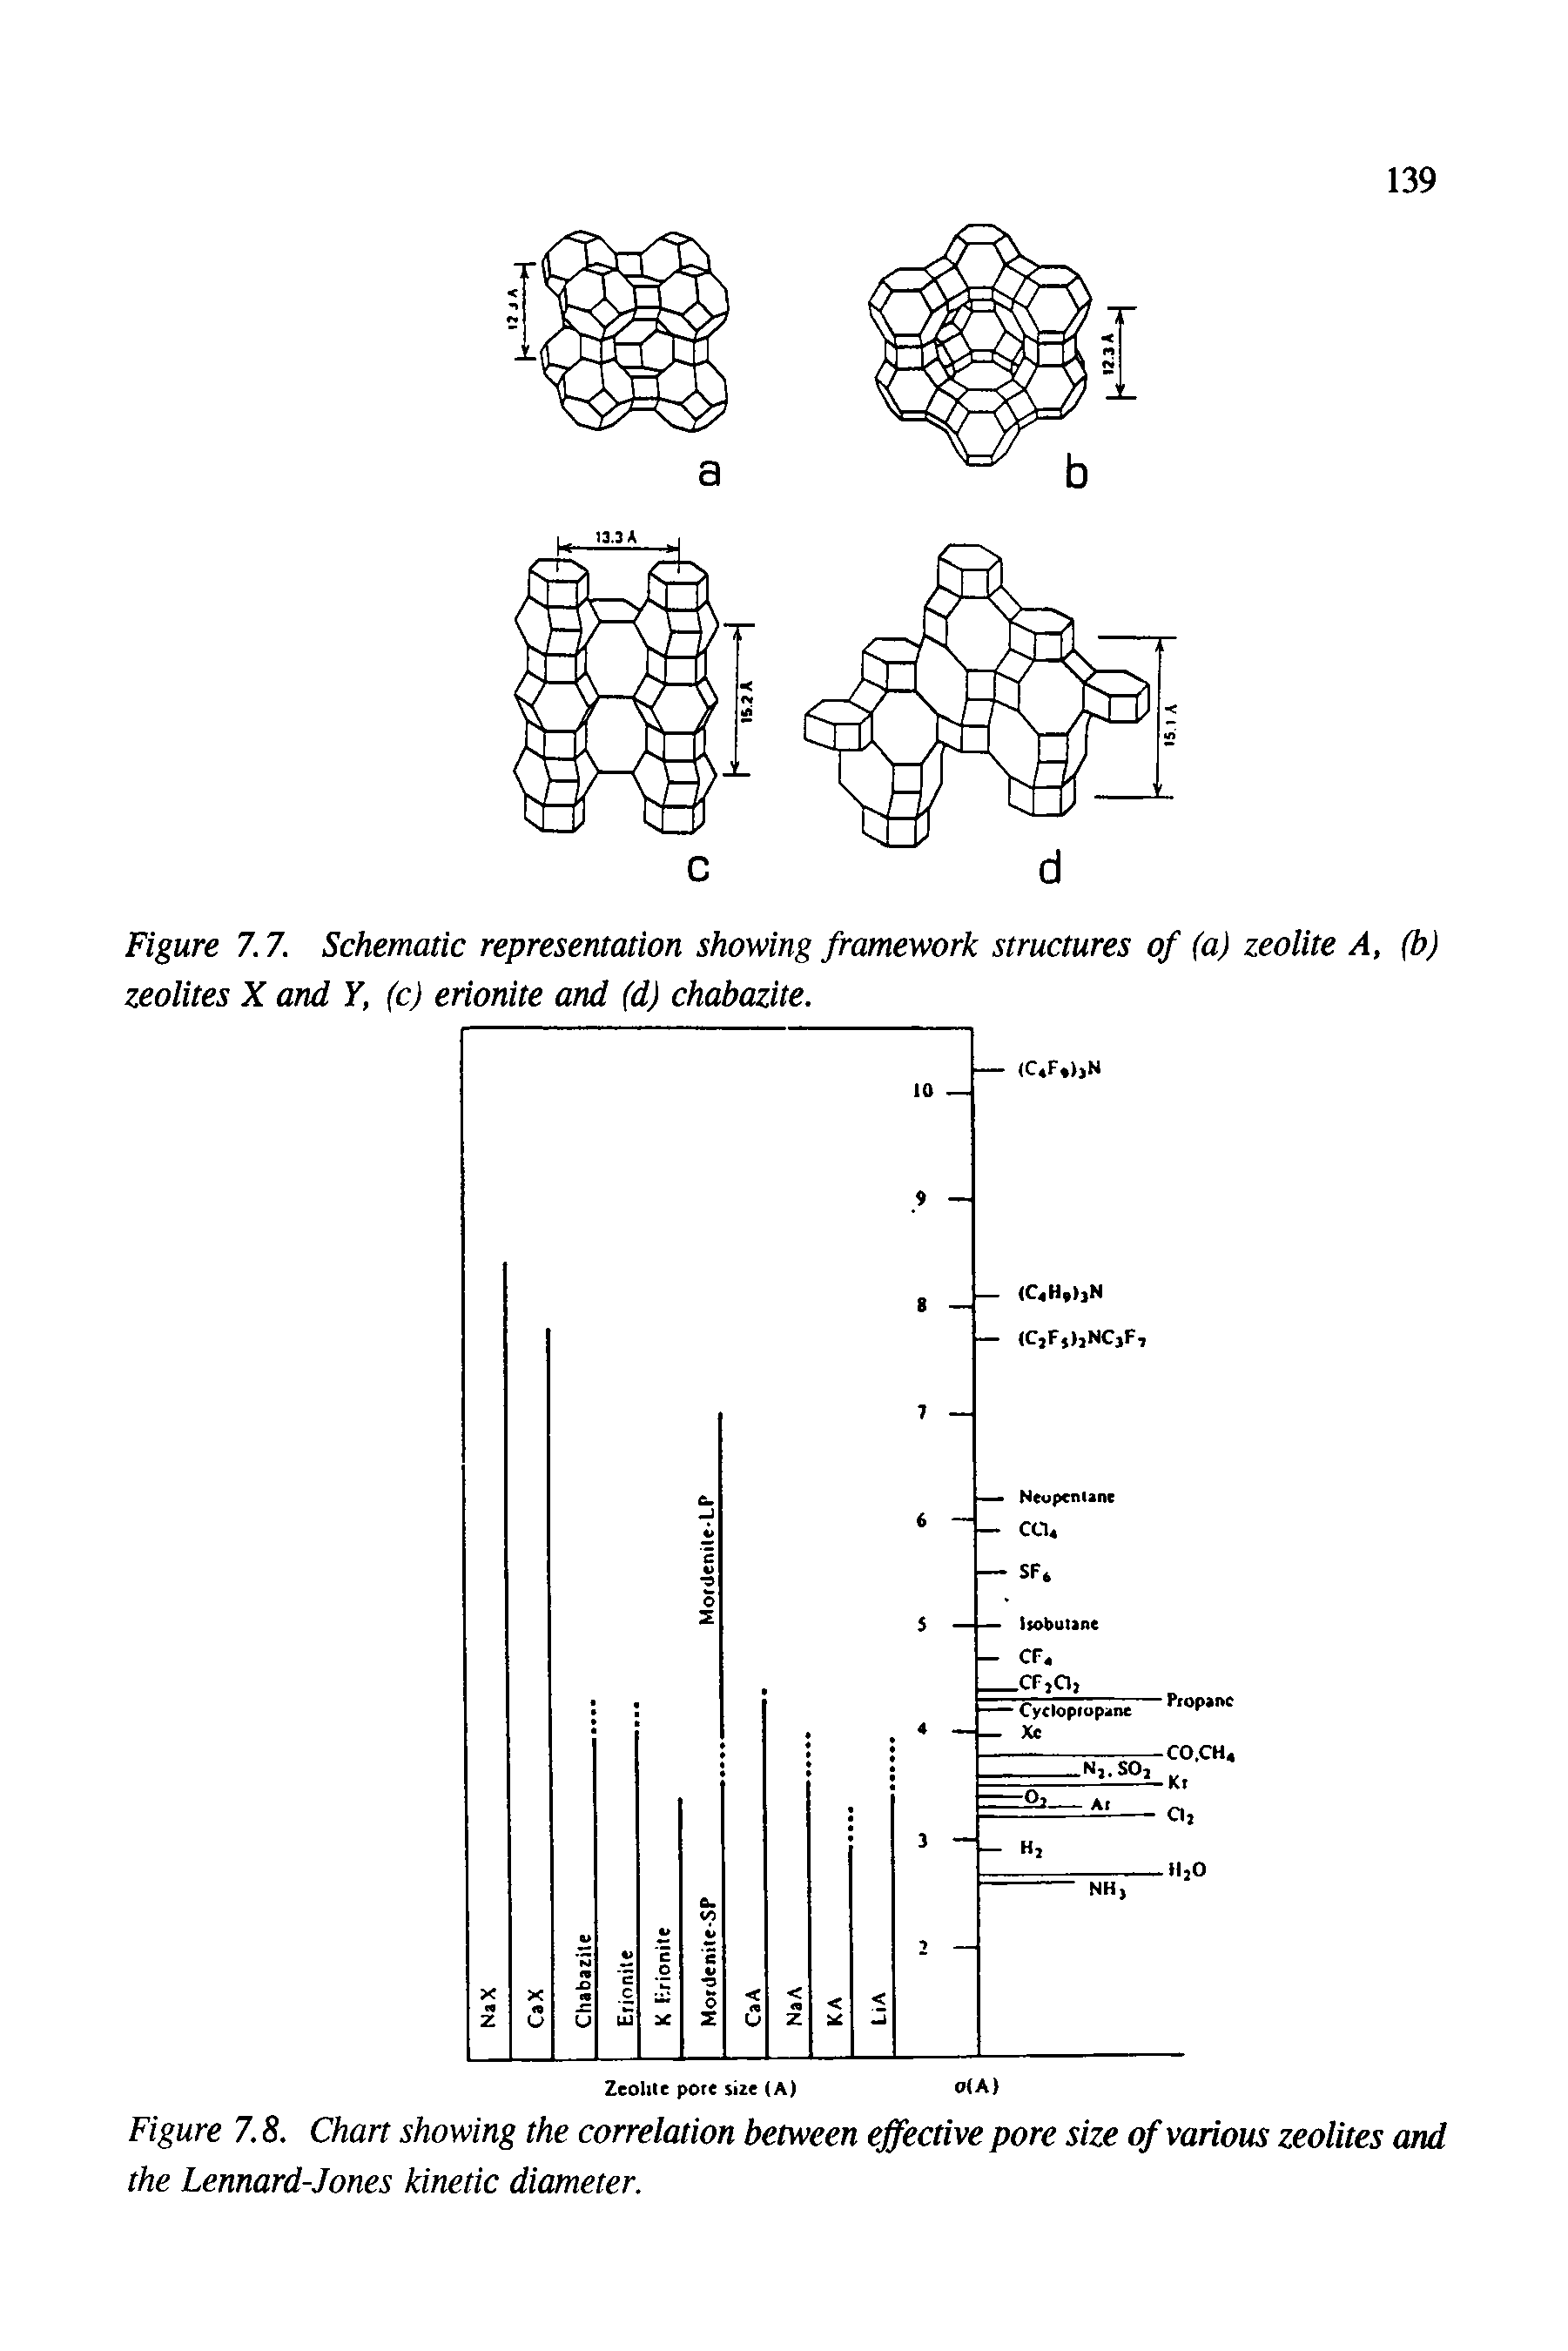 Figure 7.7. Schematic representation showing framework structures of (a) zeolite A, (b) zeolites X and Y, (c) erionite and (d) chabazite.